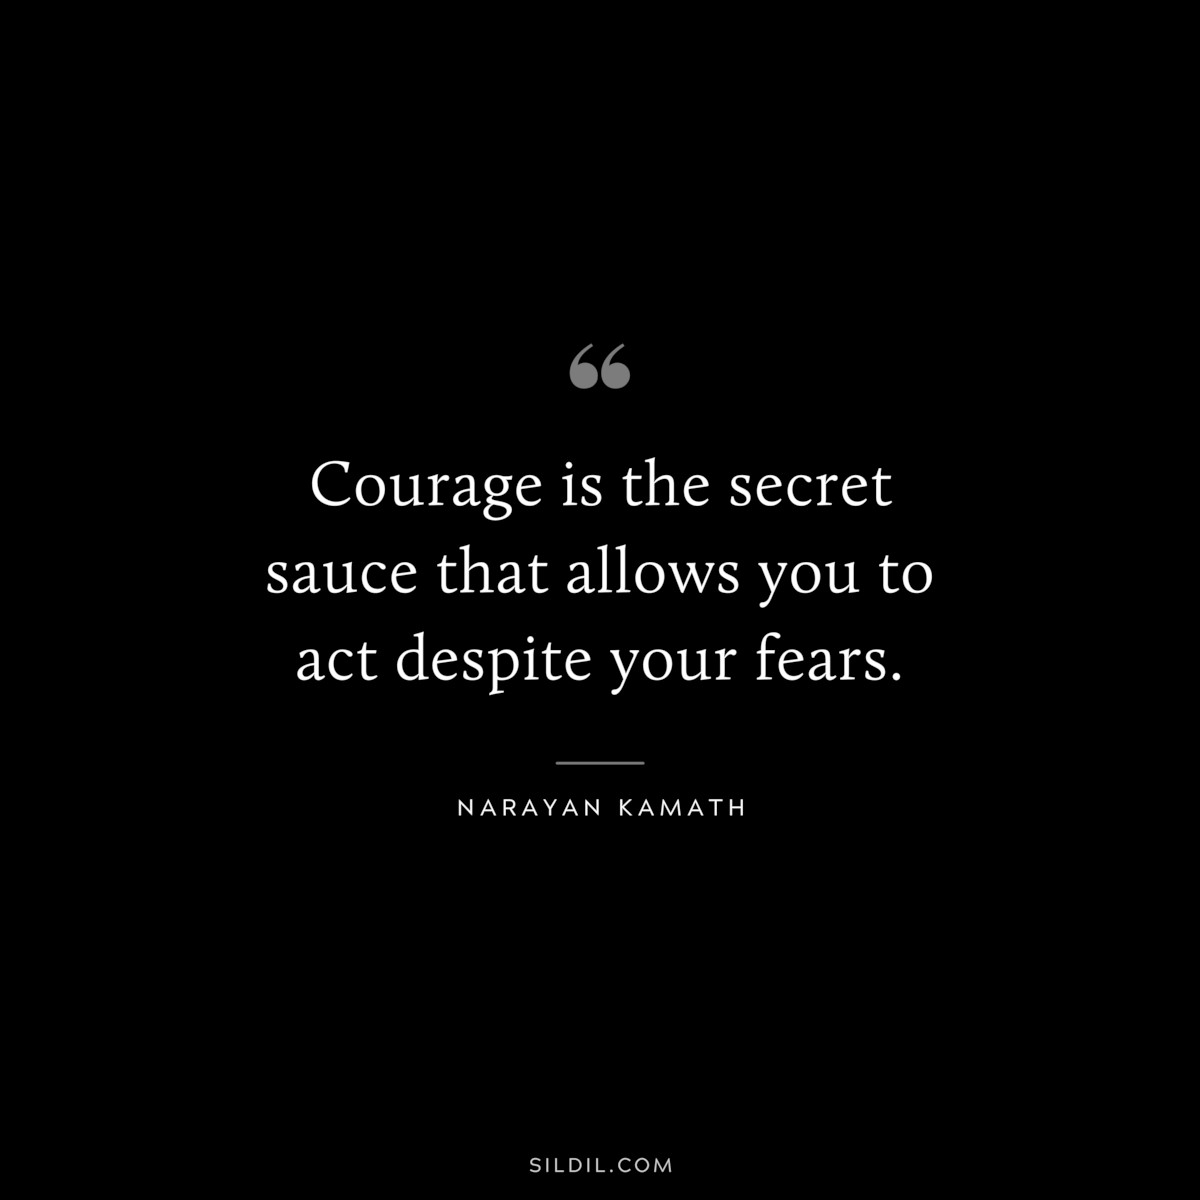 Courage is the secret sauce that allows you to act despite your fears. ― Narayan Kamath